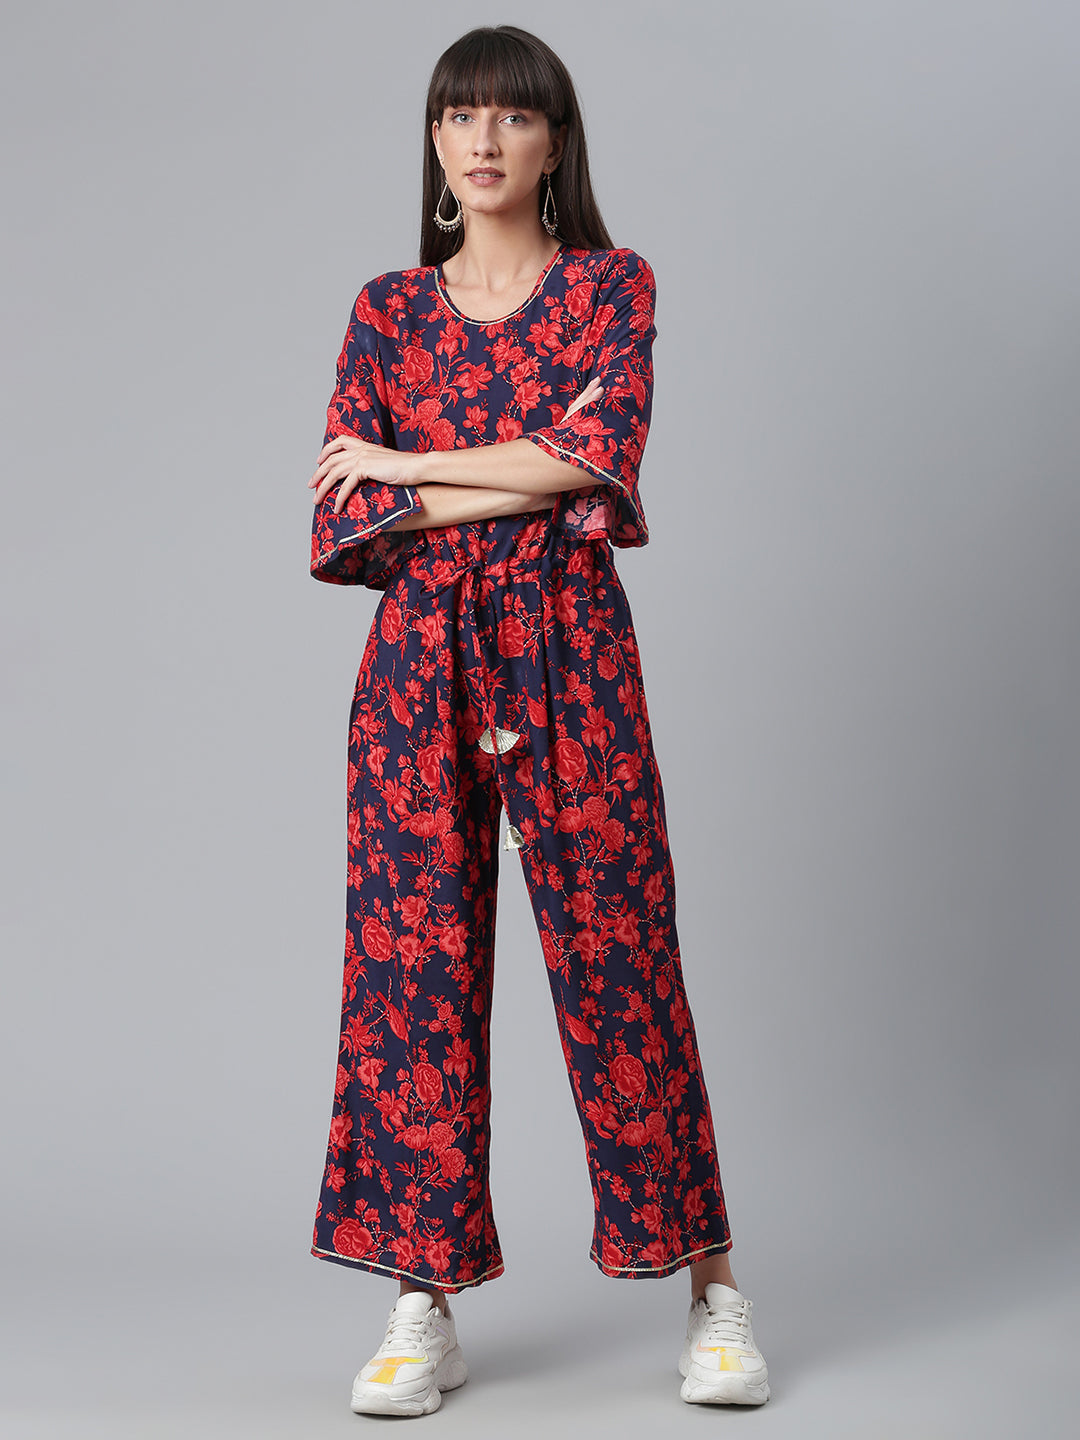 Women's Navy & Red Rayon Printed Jumpsuit - Ahalyaa